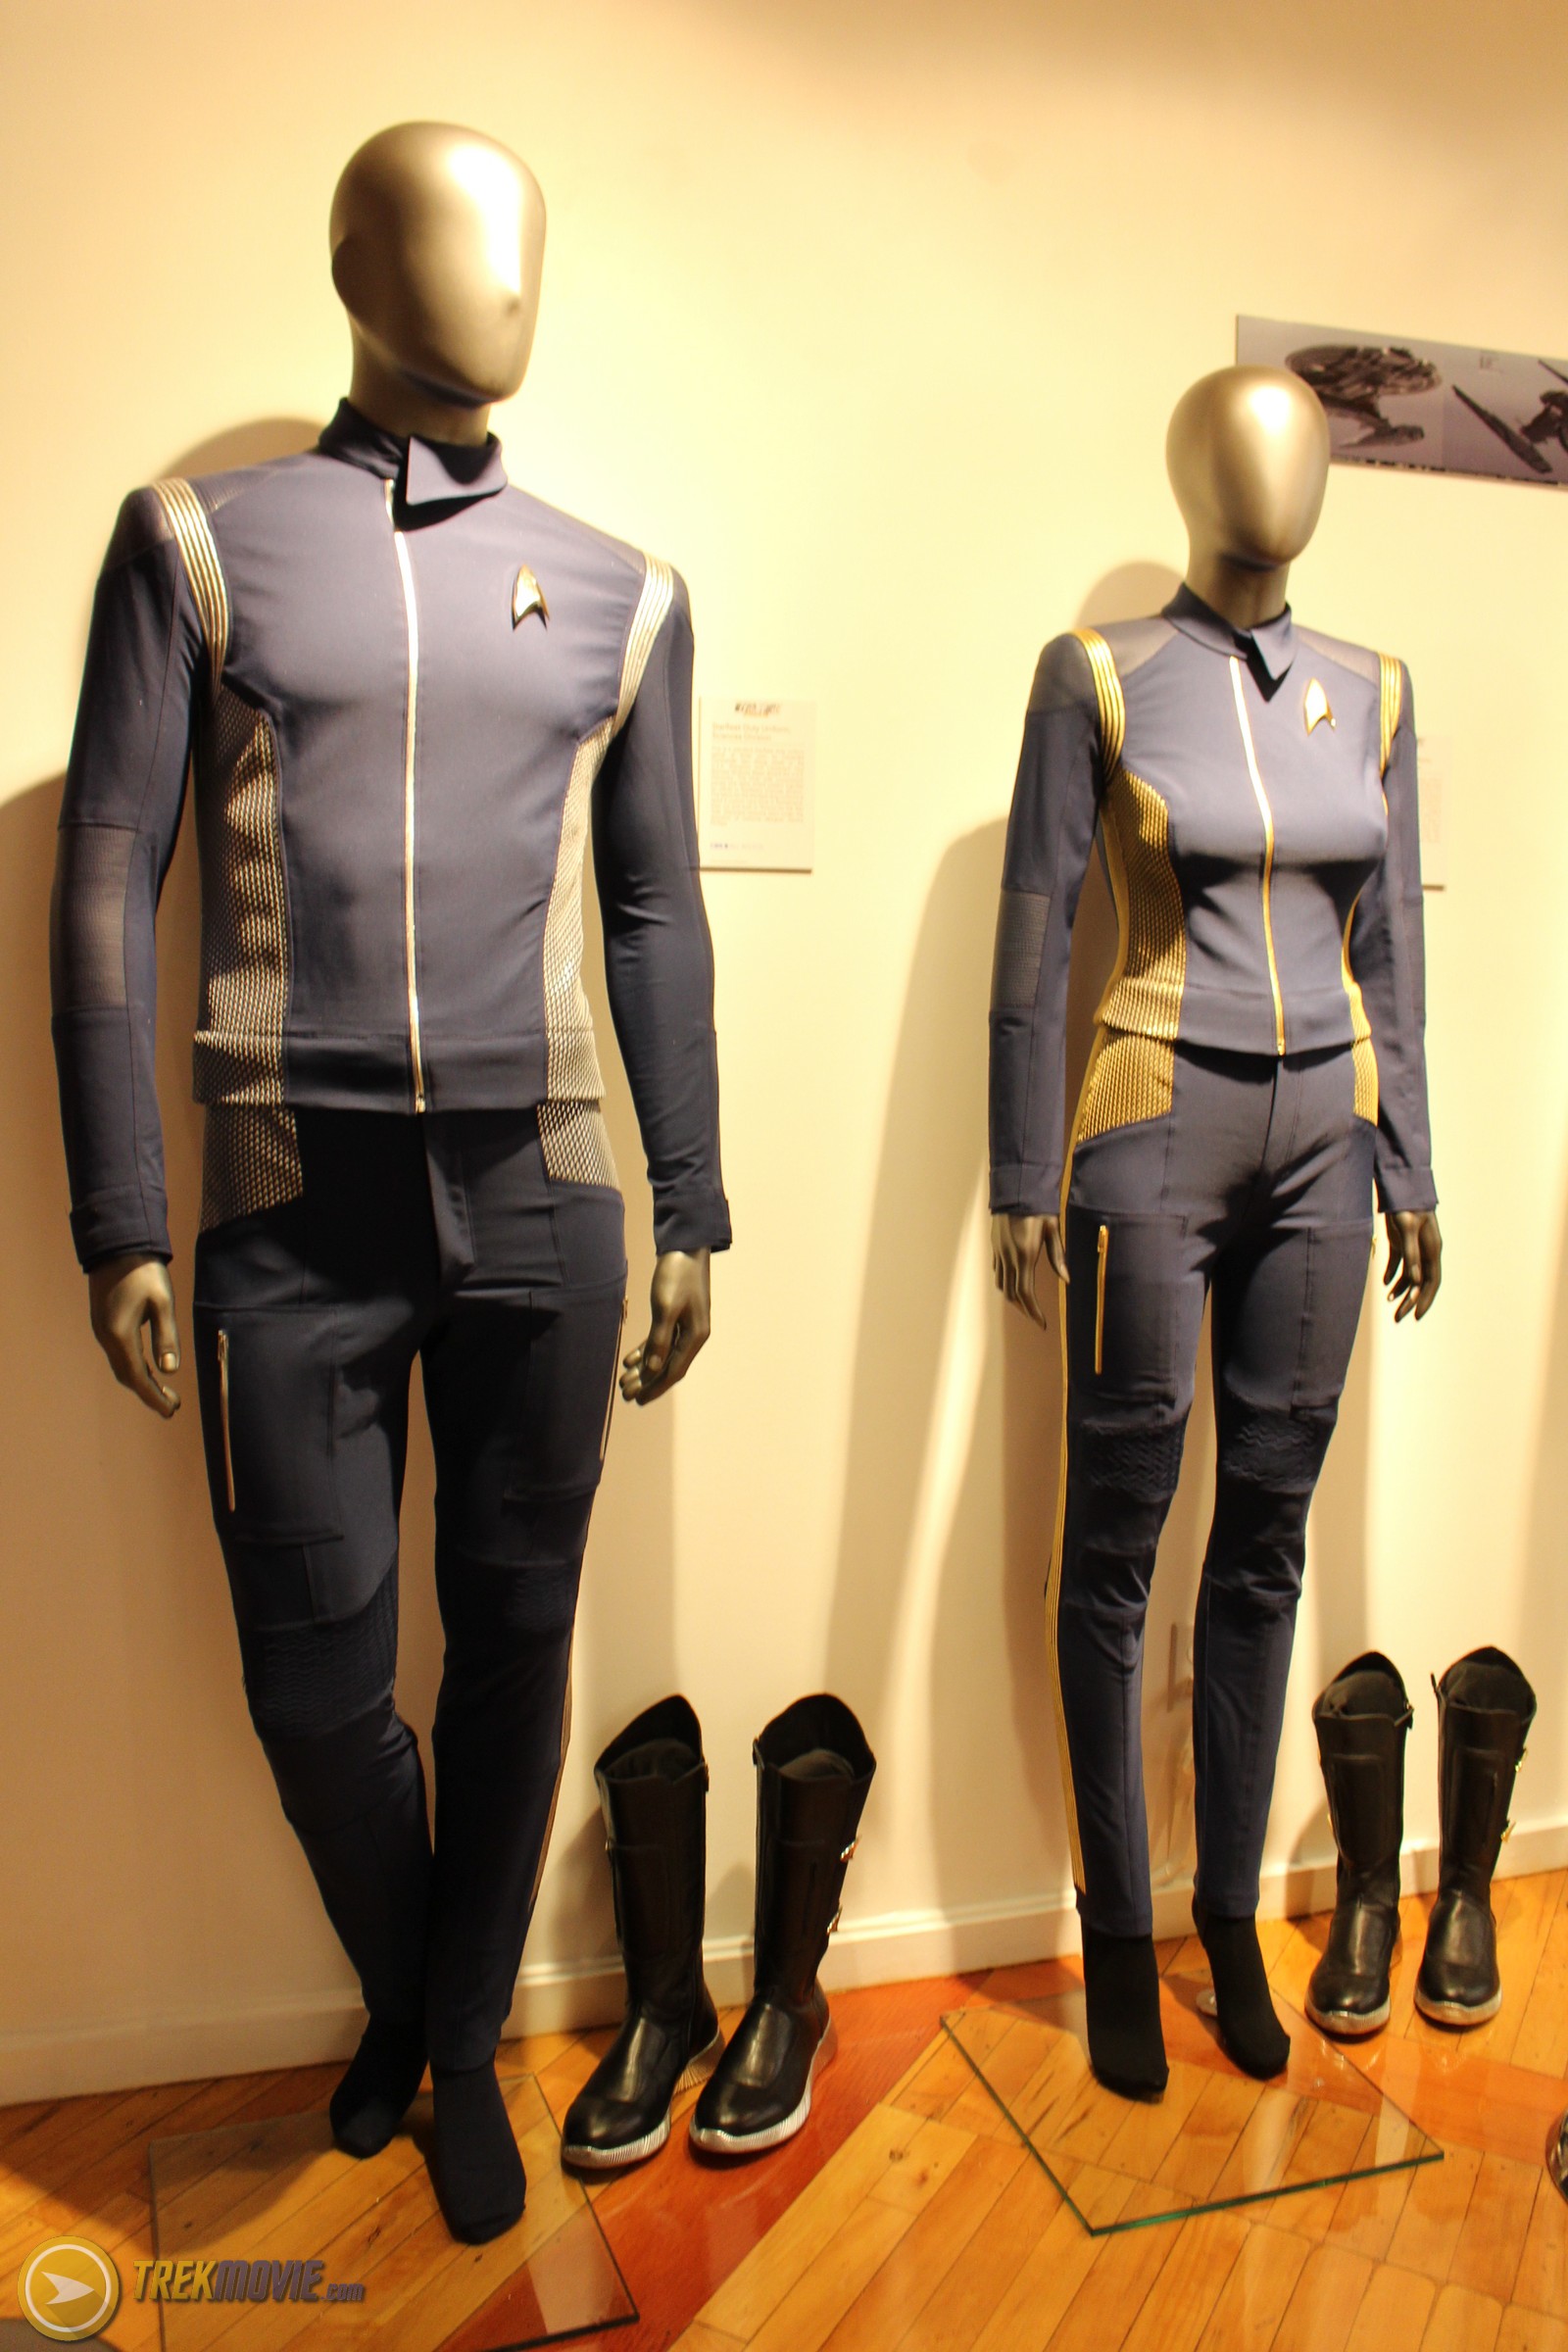 star trek clothes meaning